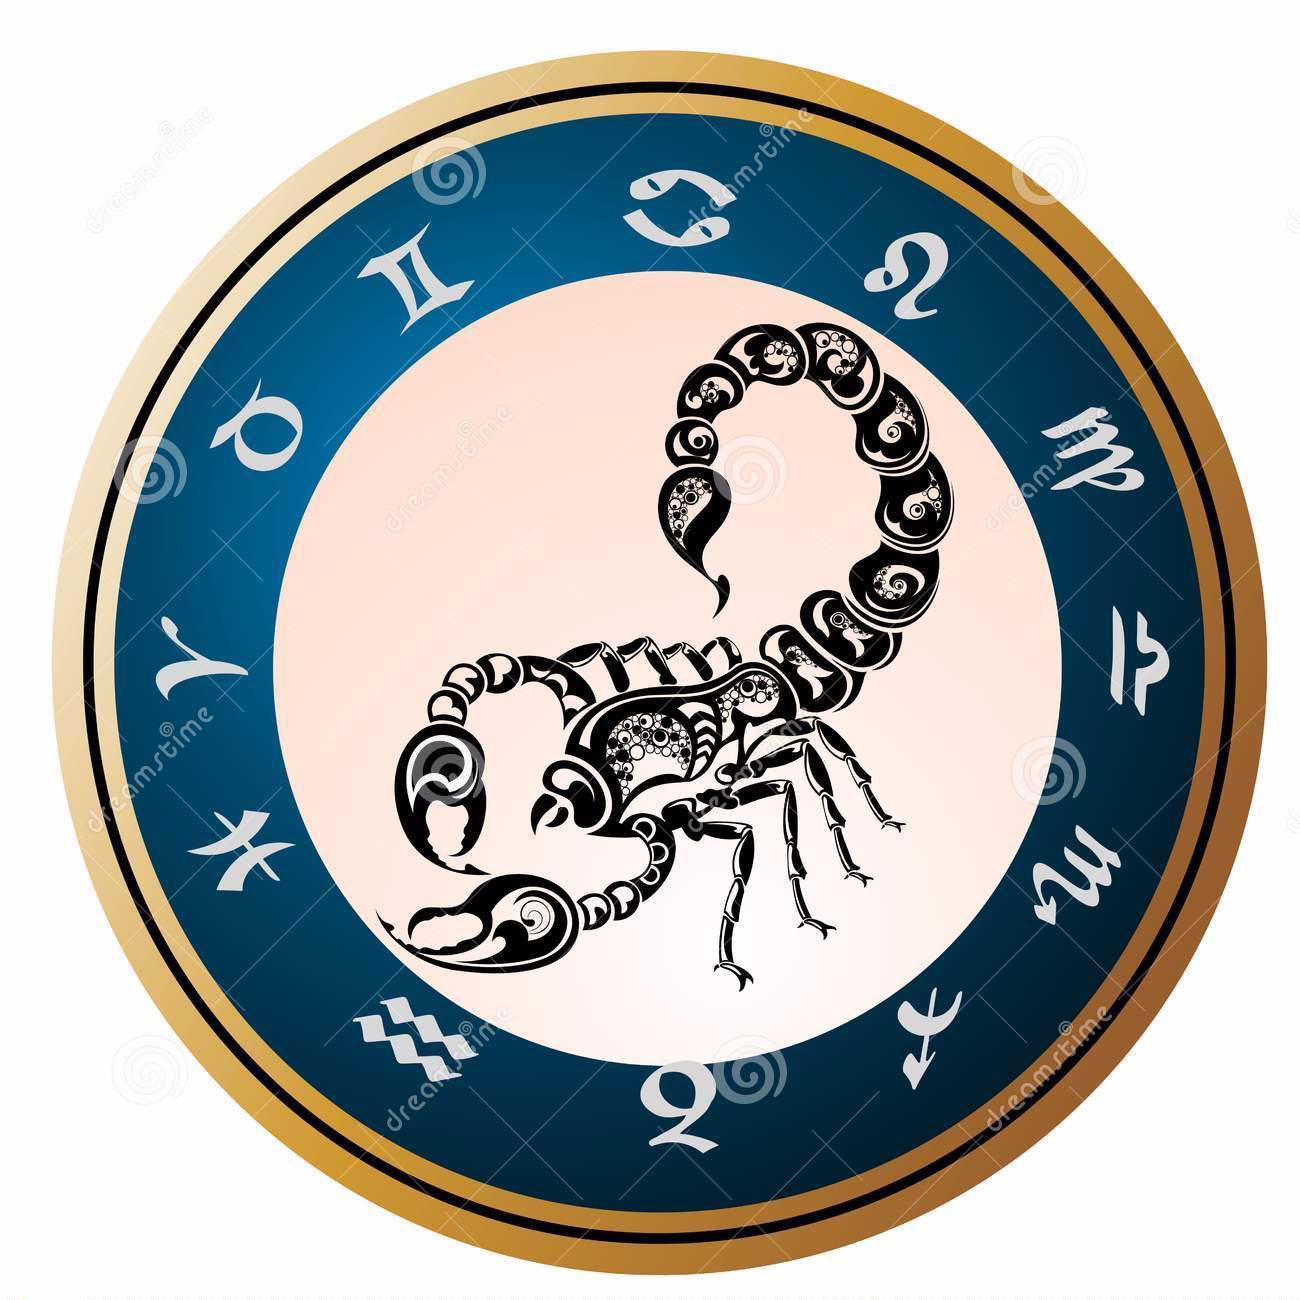 Scorpio is the eighth sign of the zodiac, and that shouldn't be taken lightly -- nor should Scorpios!